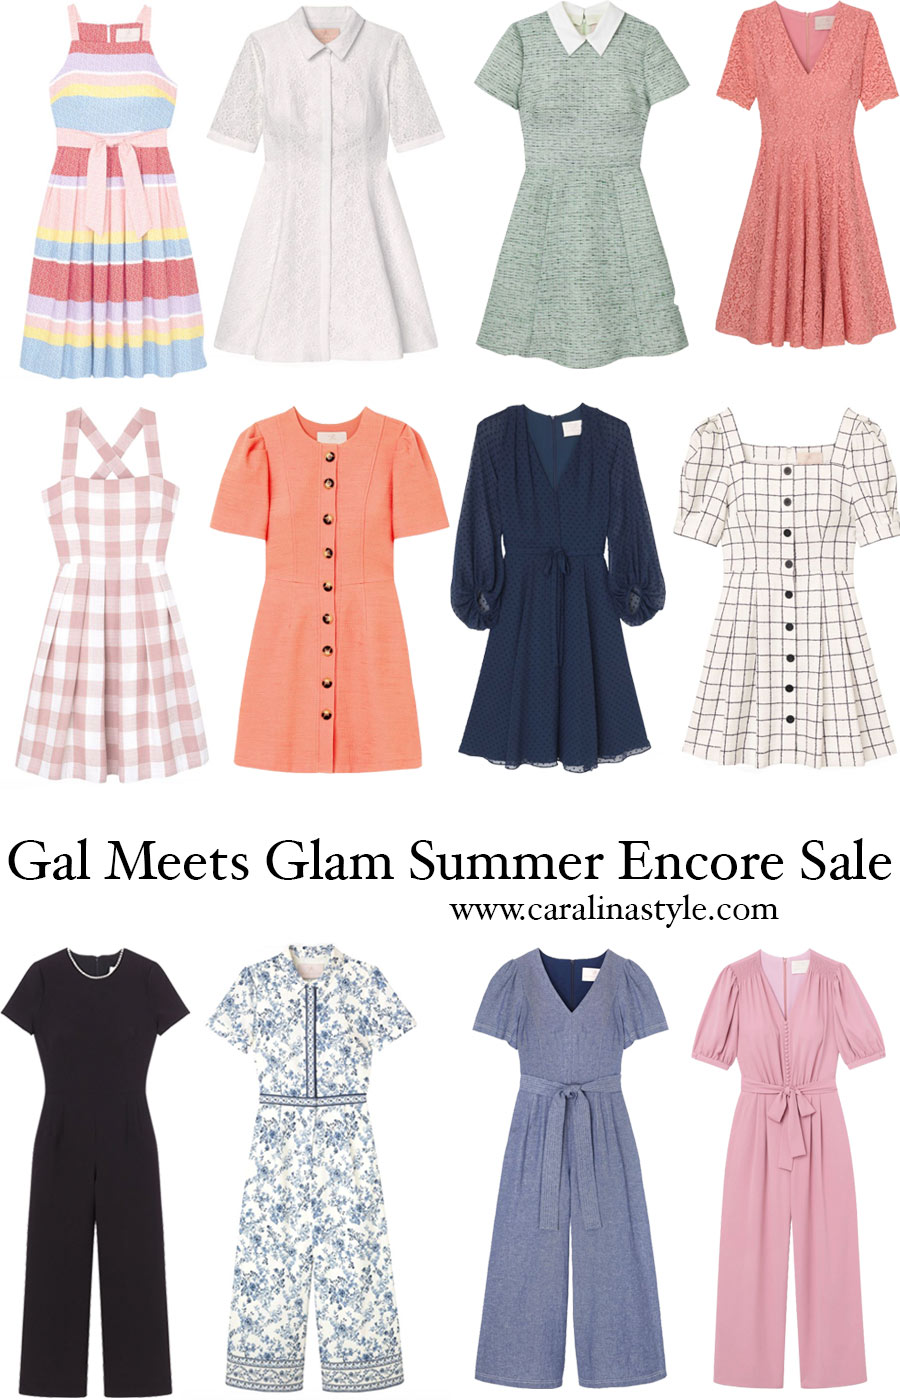 Gal Meets Glam Collection Summer Encore Sale Picks | Caralina Style